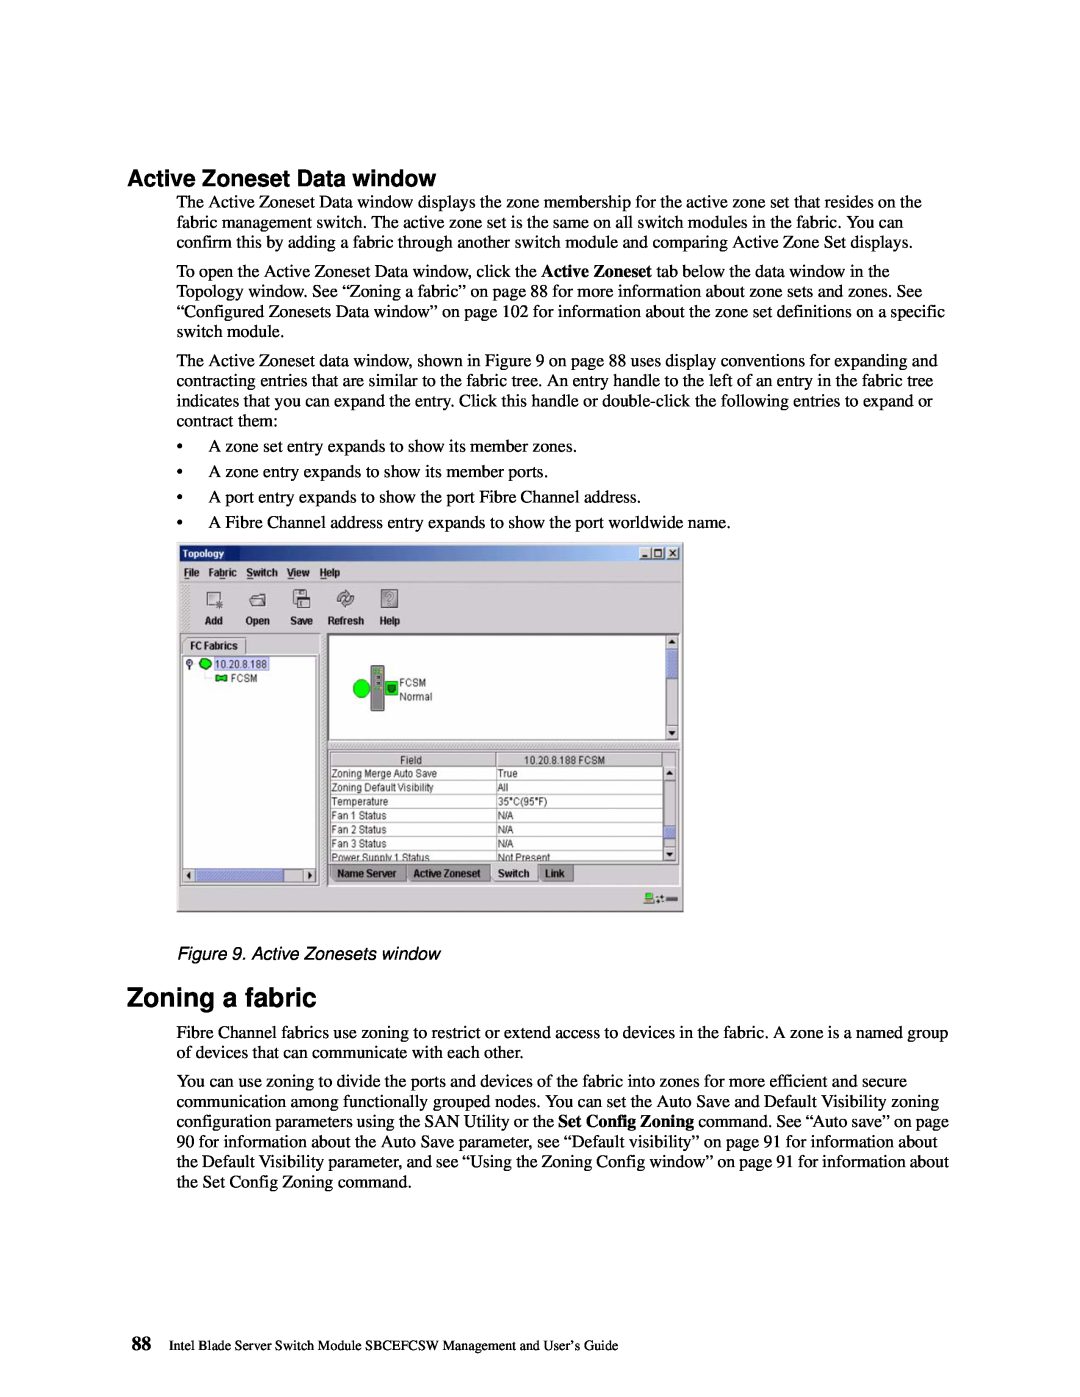 Intel SBCEFCSW manual Zoning a fabric, Active Zoneset Data window, Active Zonesets window 